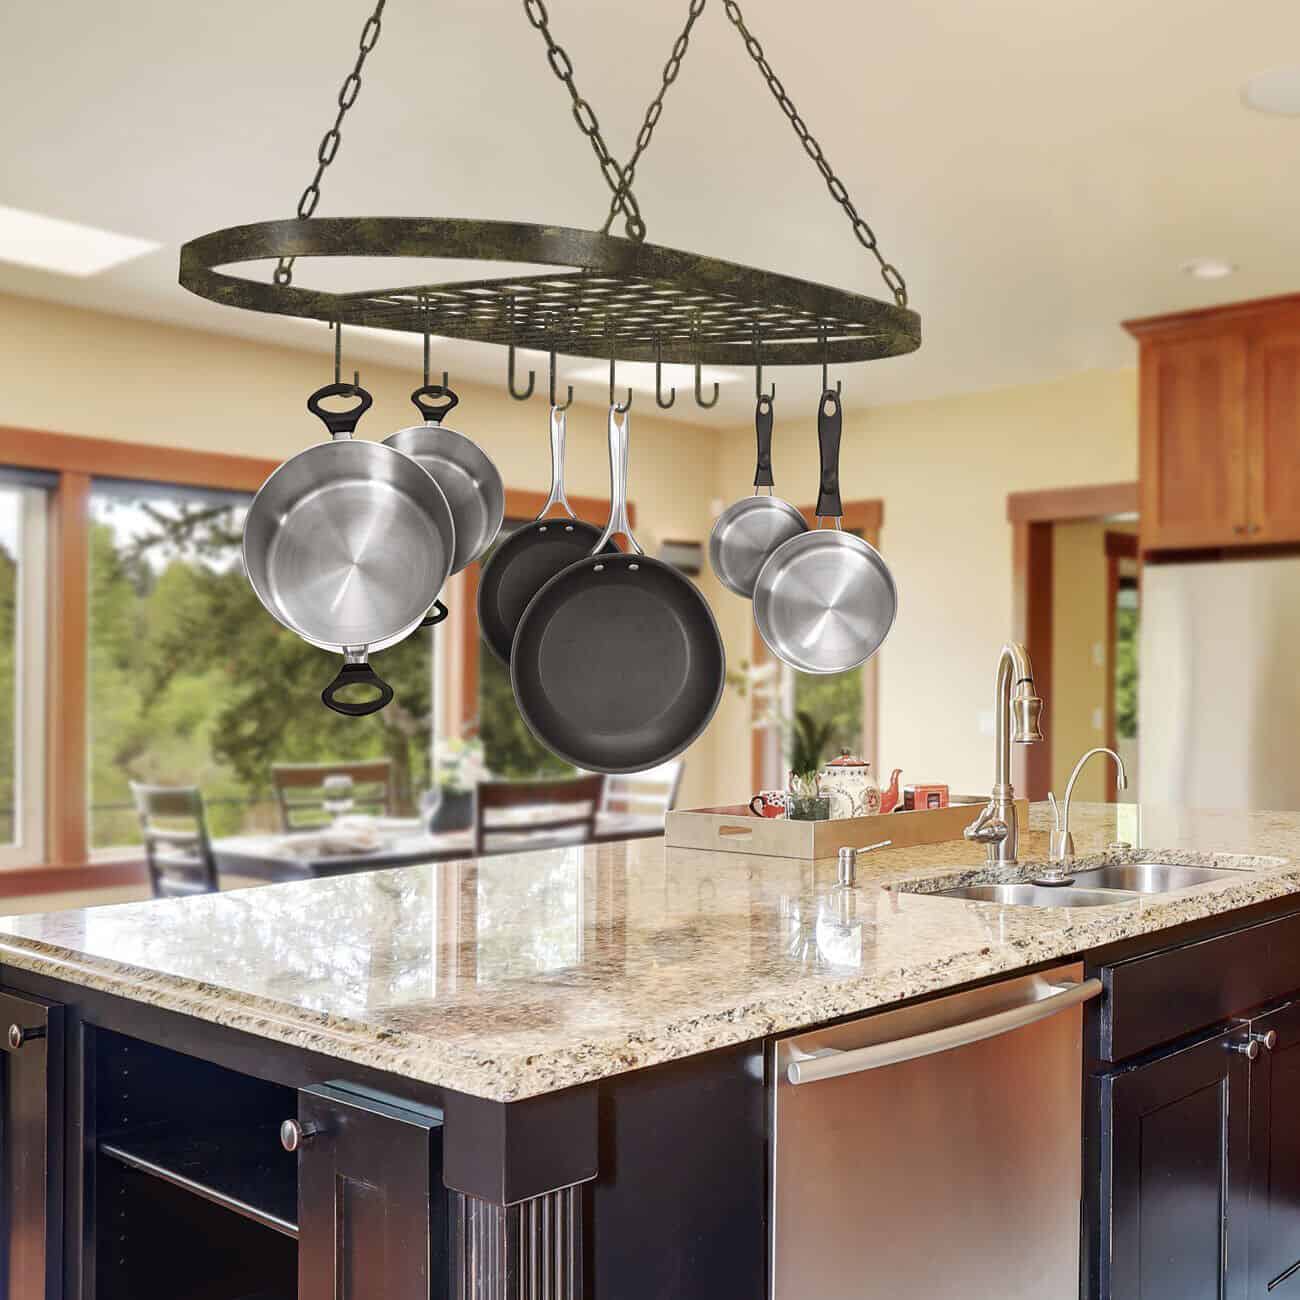 A kitchen with pots hanging from the ceiling.